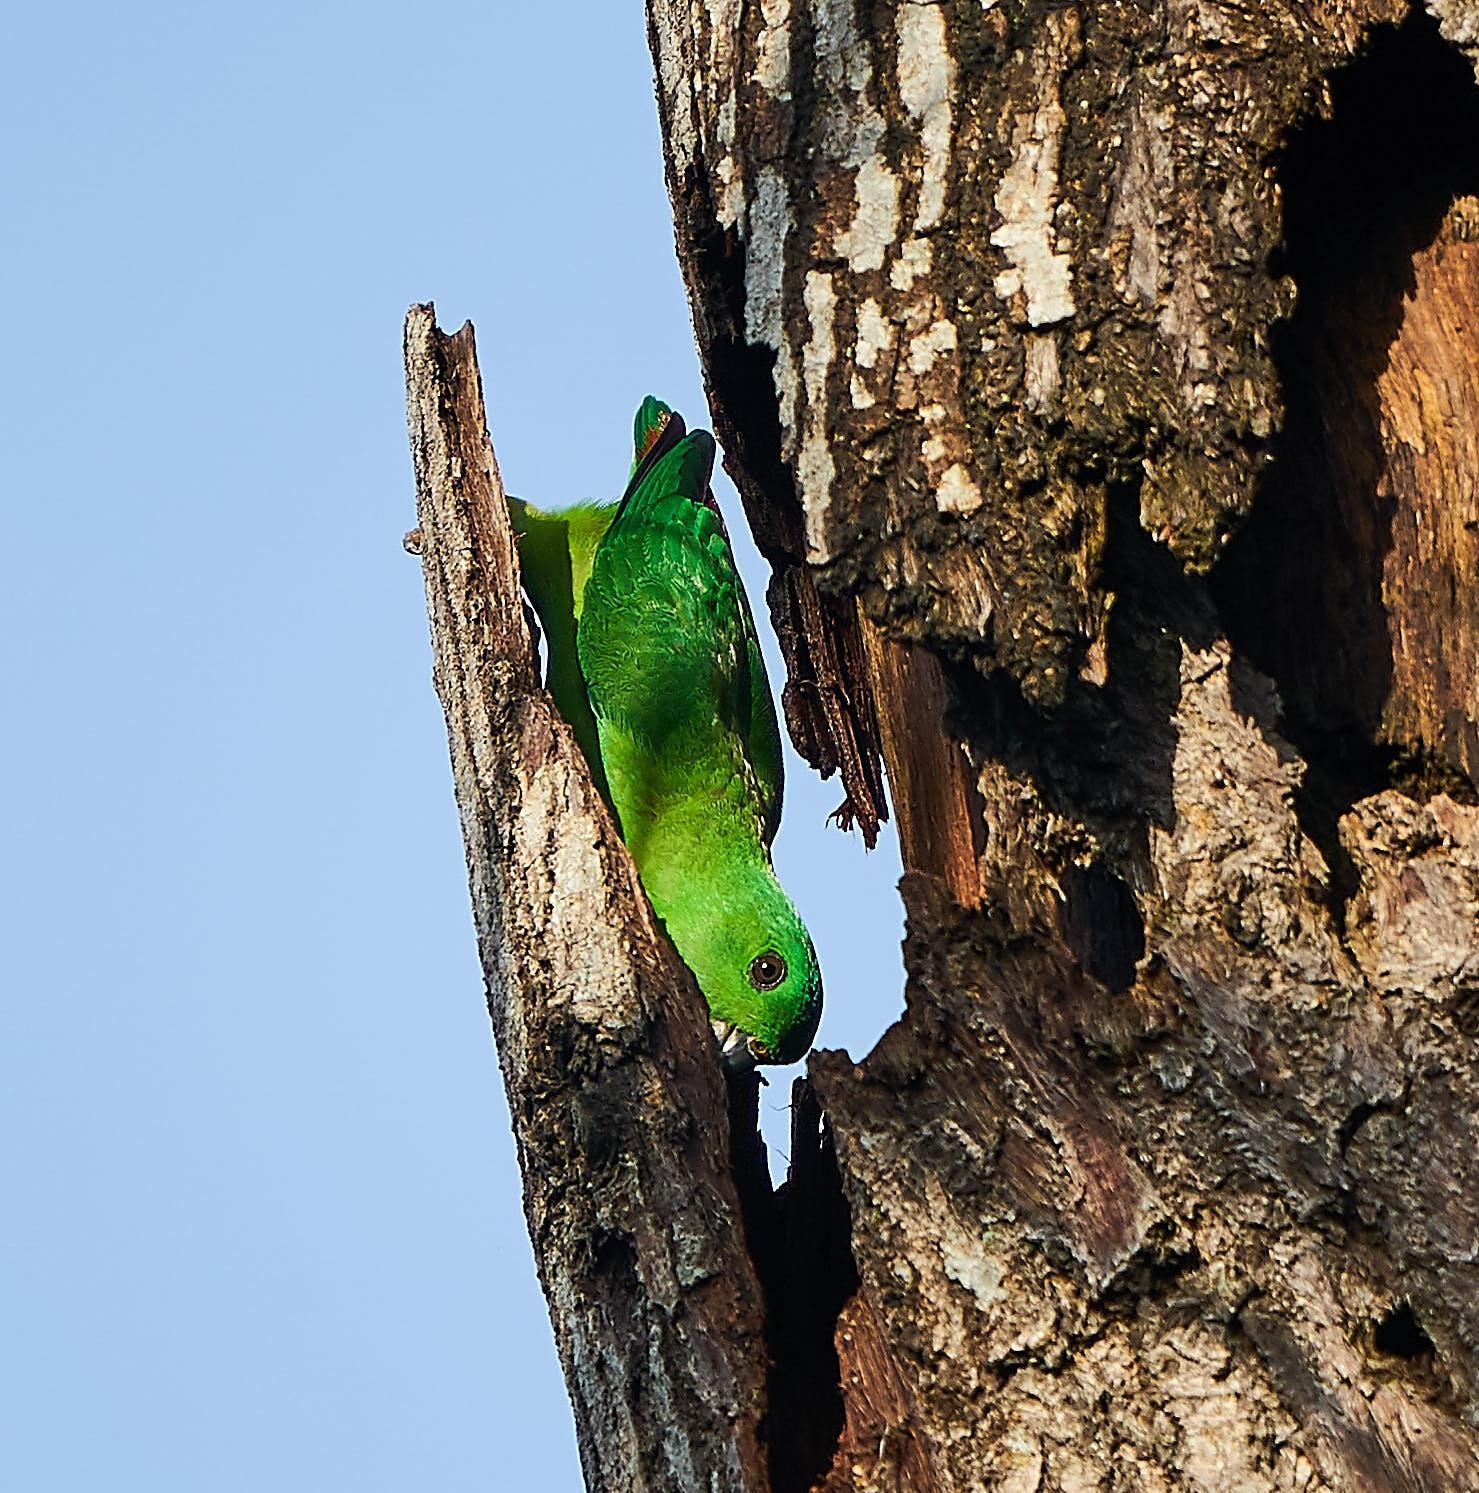 Blue-crowned Hanging-Parrot Photo by Steven Cheong